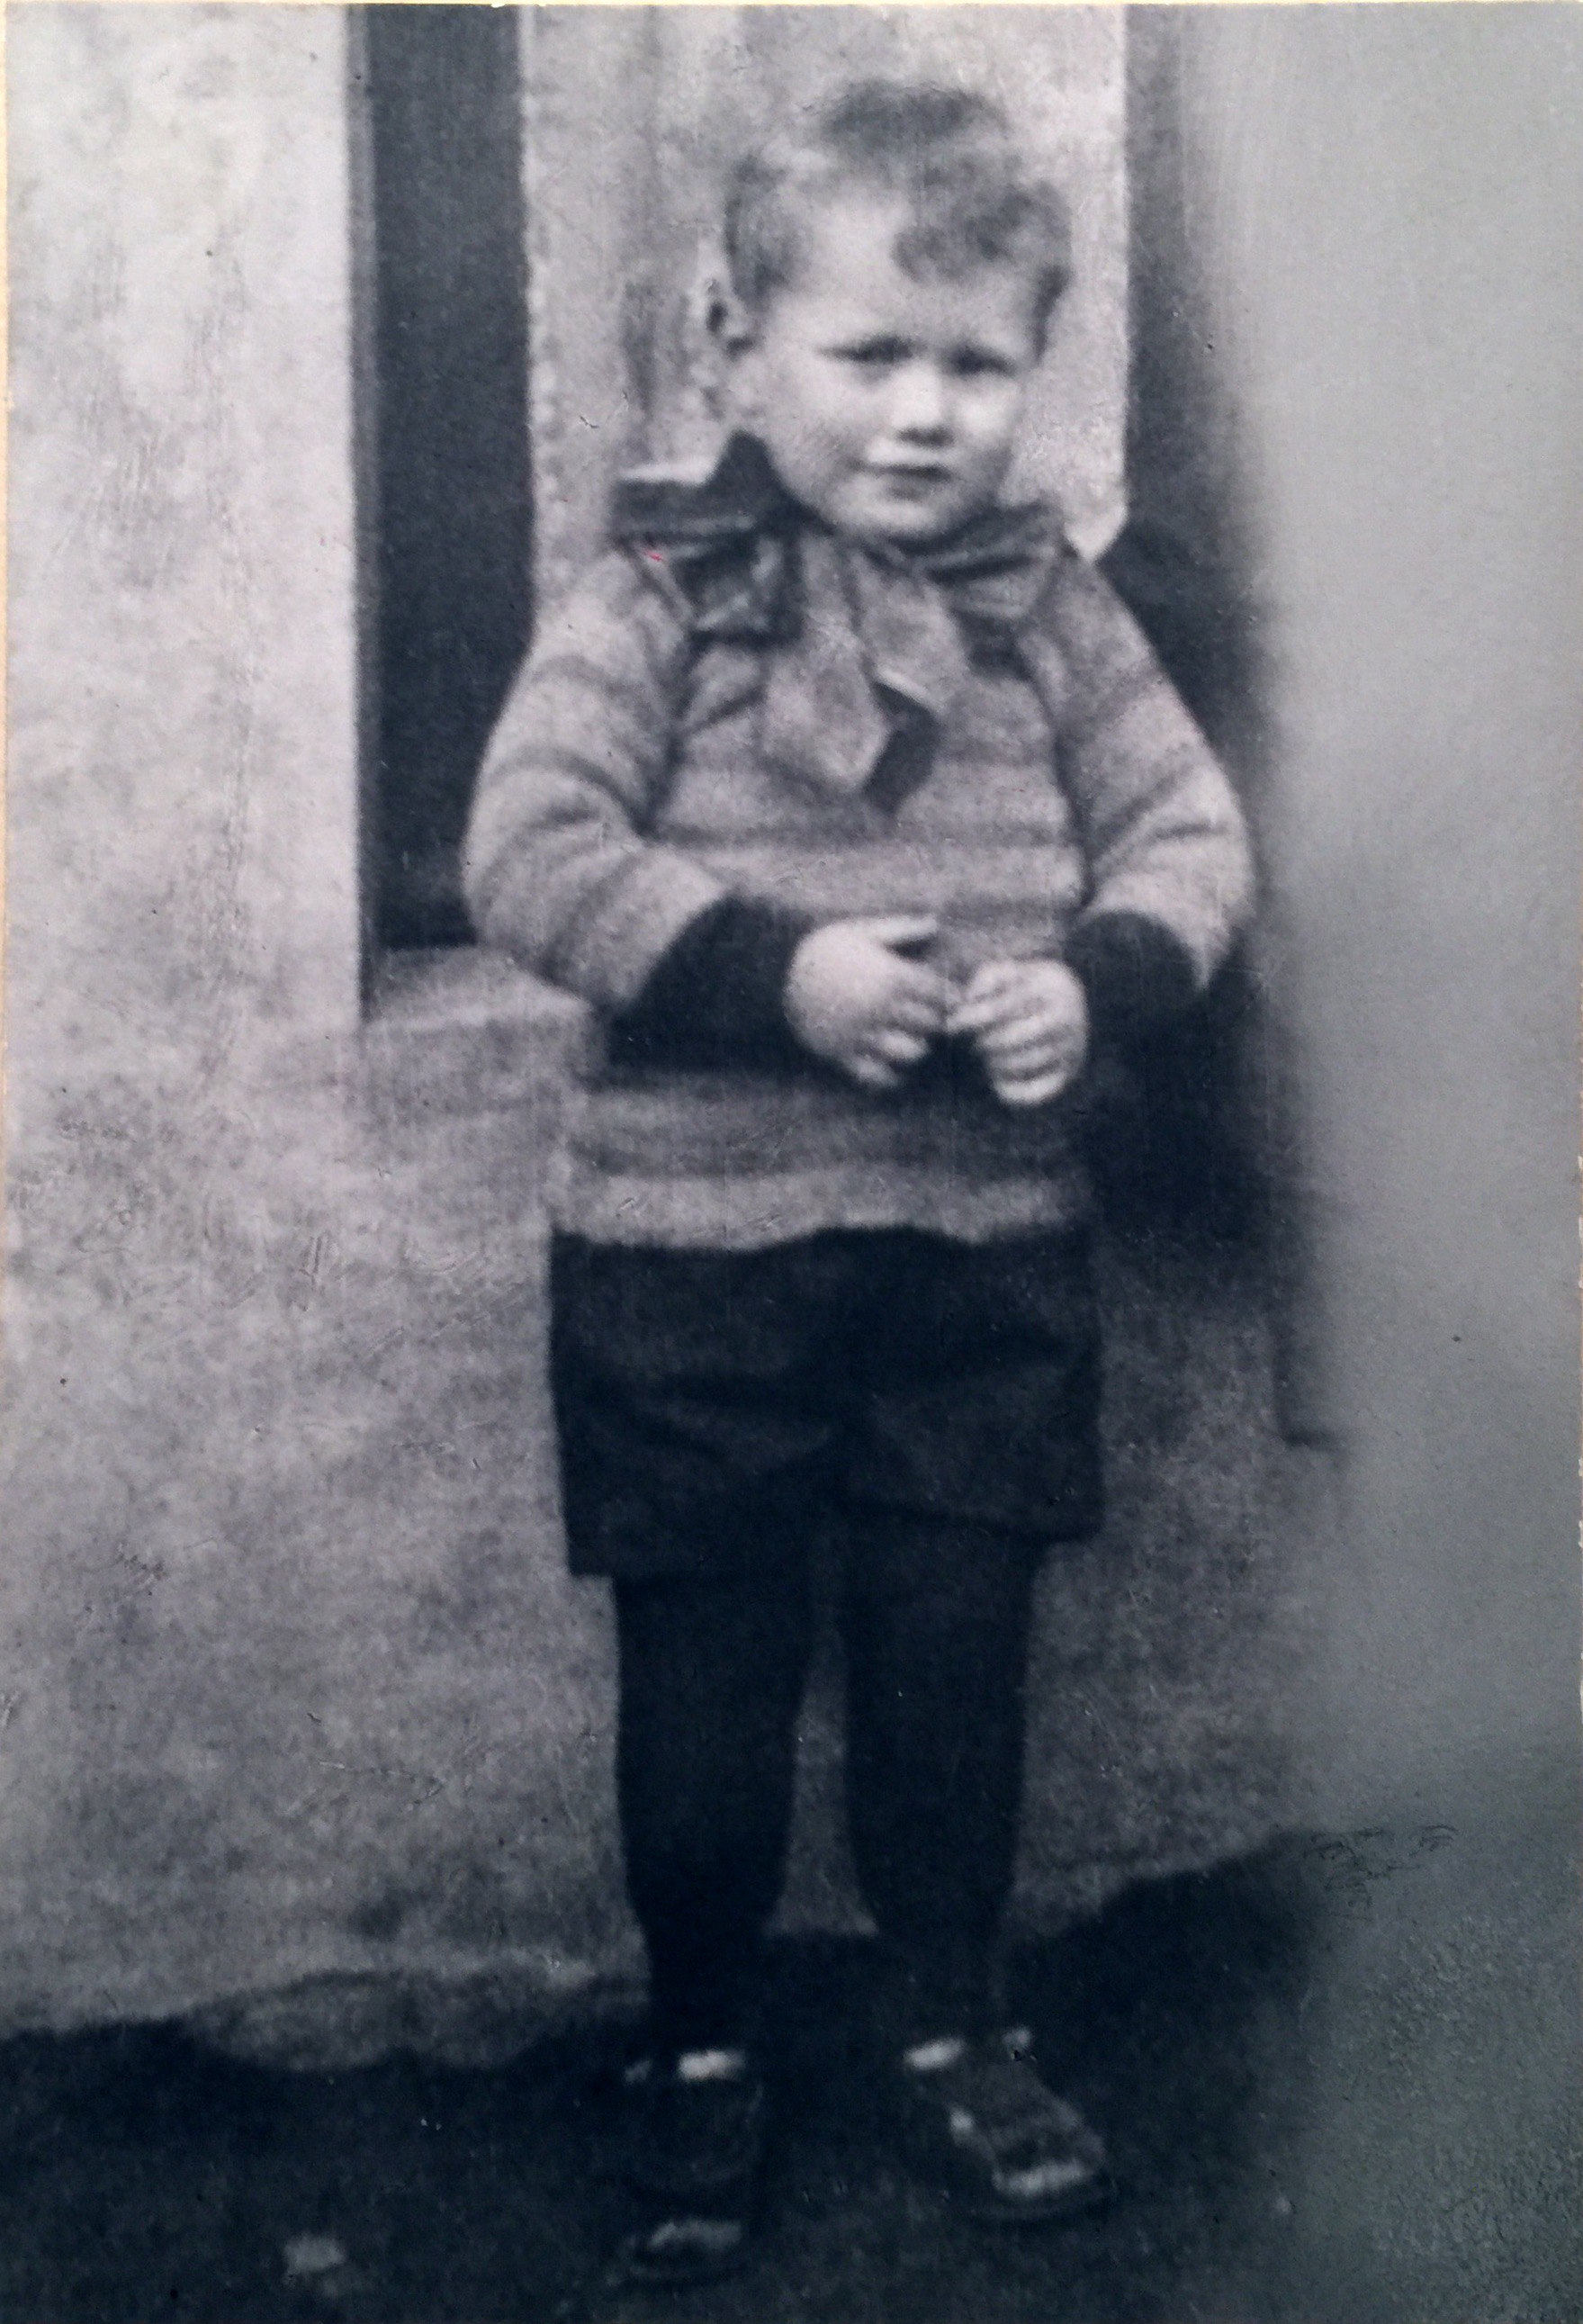 My dad 3 years old in 1929